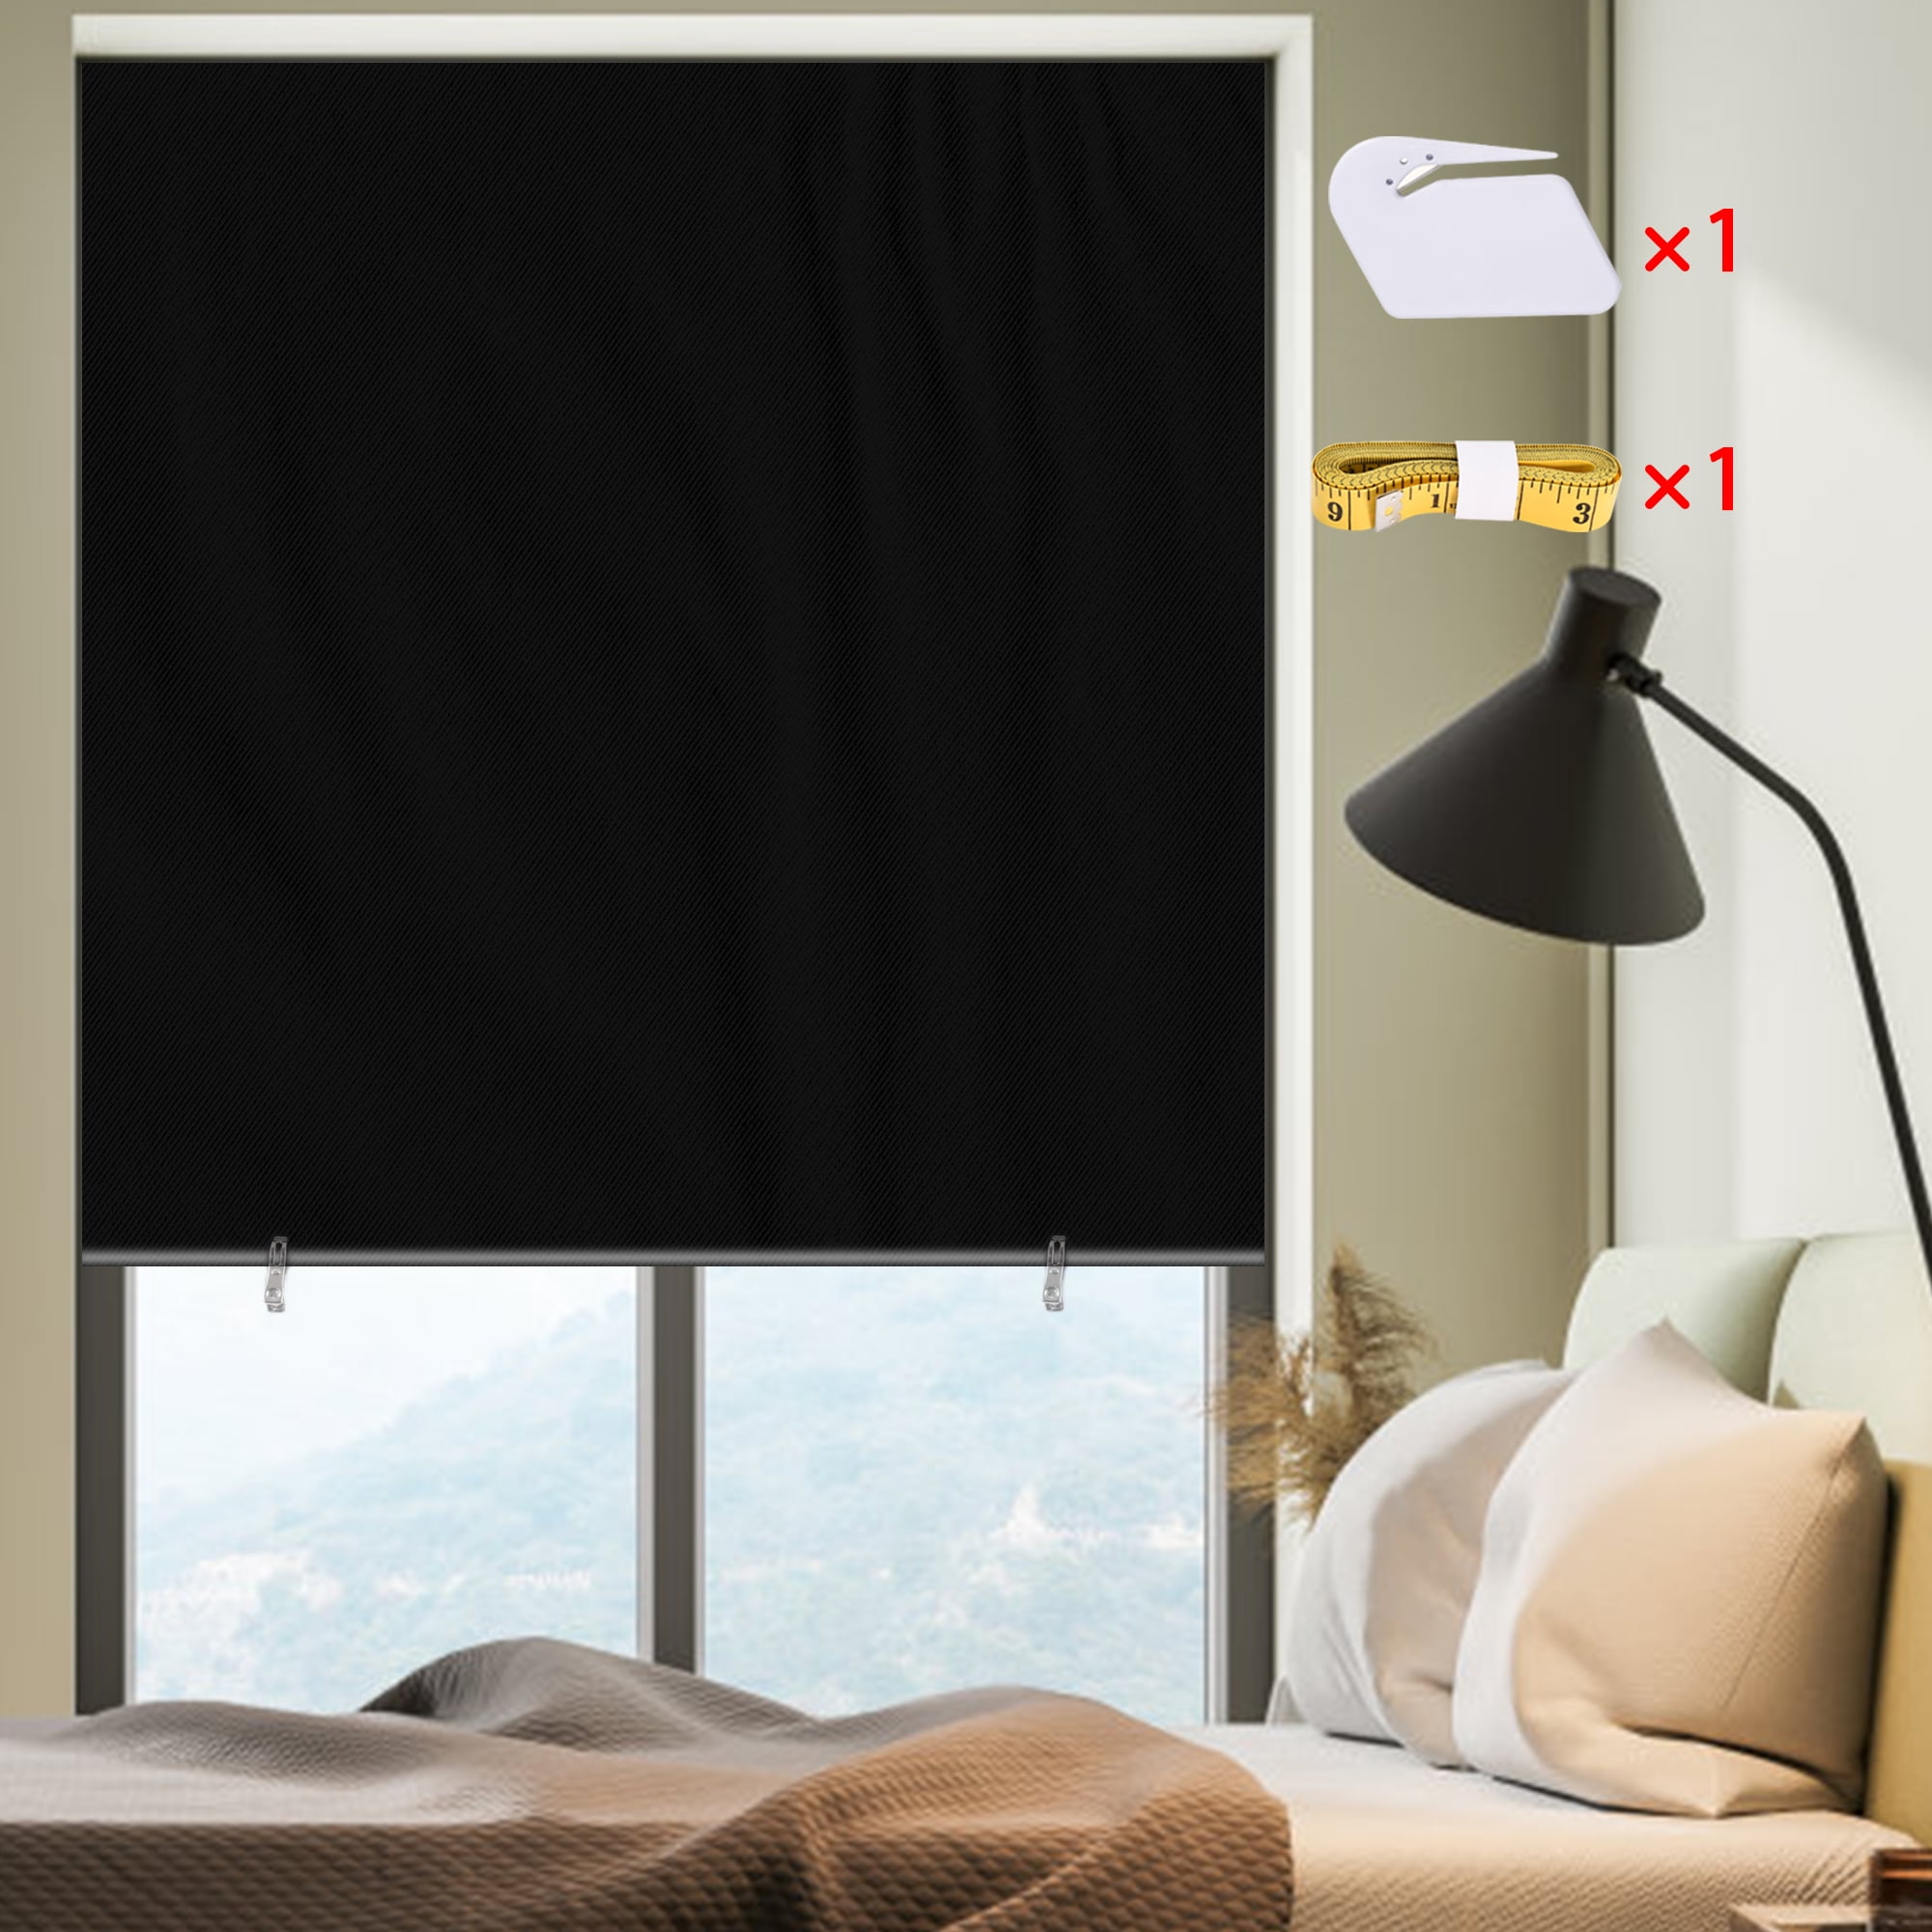 Biltek Smart Blinds for Windows Motorized Roller Blinds & Shades Cordless Window  Blinds Electric Blinds with Remote Automatic Window Shades For Home Smart  Home Office 34 x 72 + Zigbee Smart Hub 